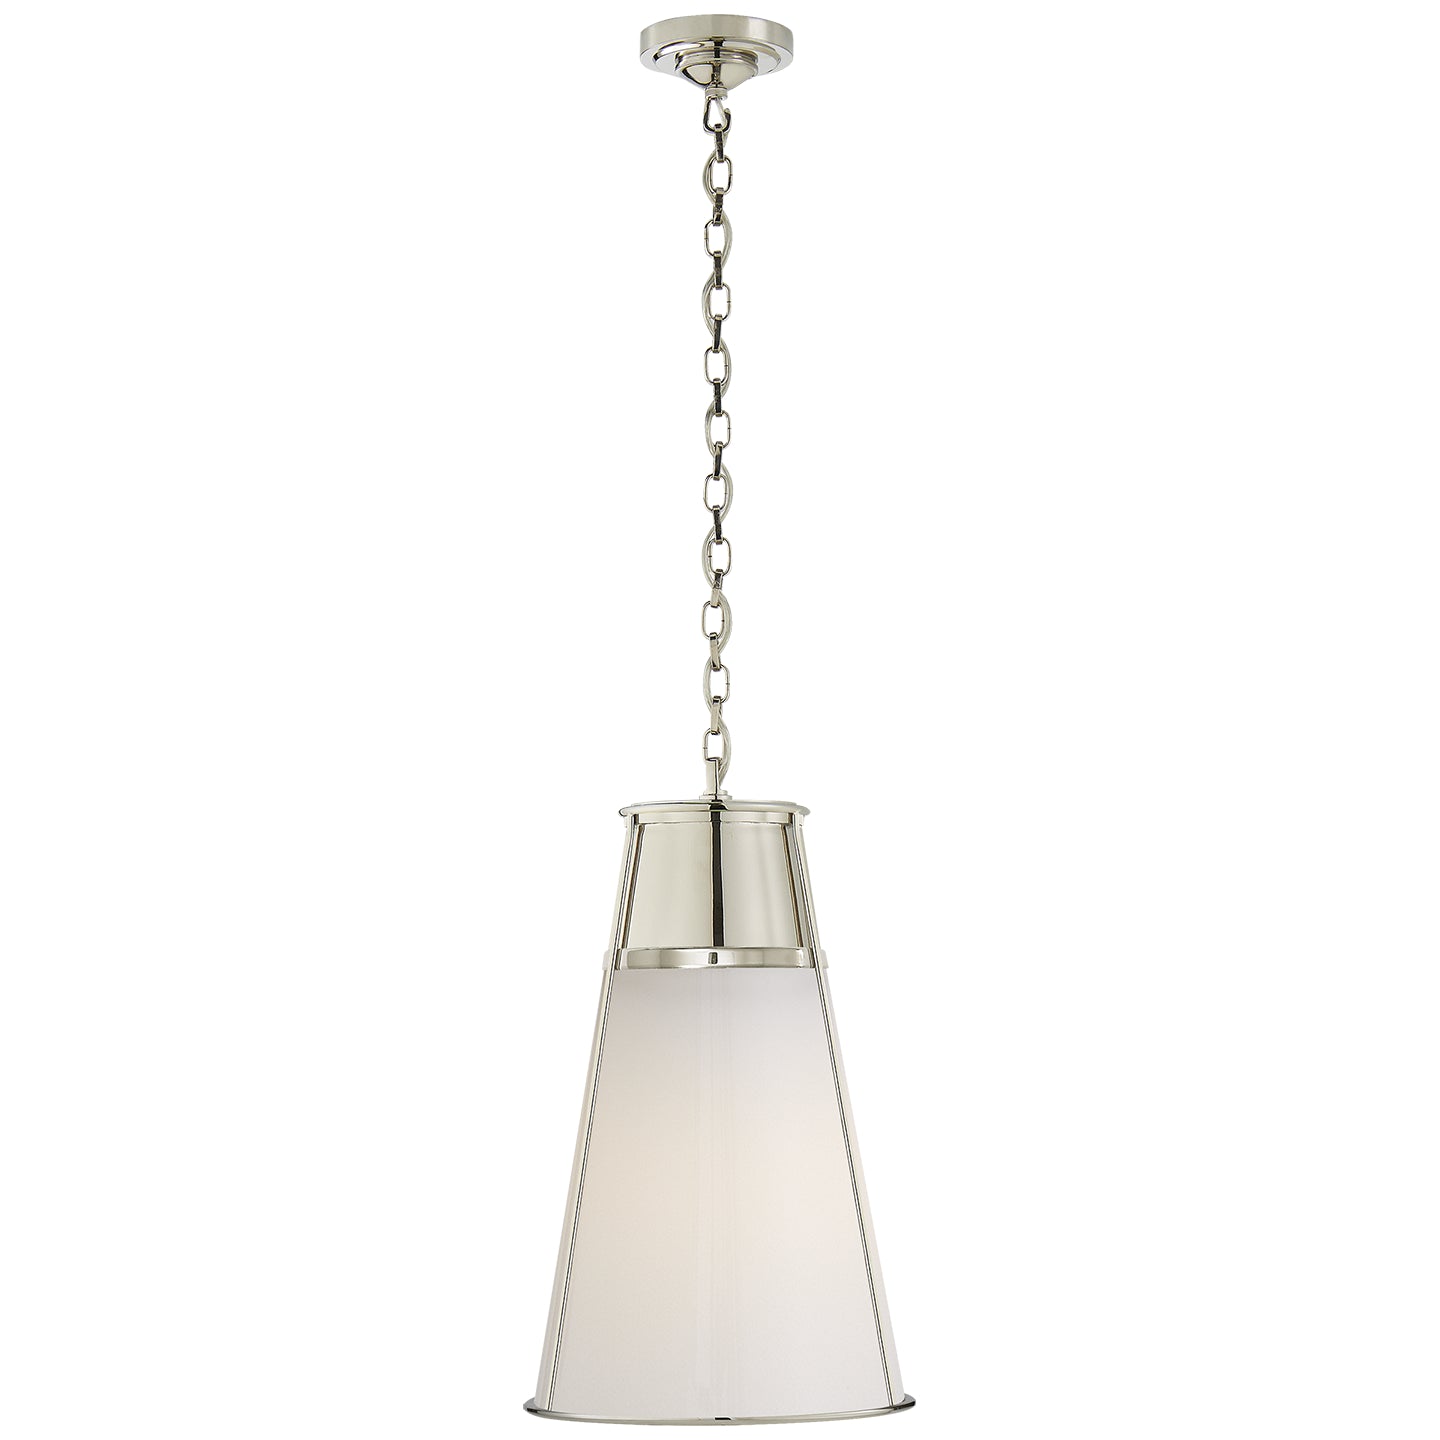 Load image into Gallery viewer, Visual Comfort Signature - TOB 5753PN-WG - One Light Pendant - Robinson - Polished Nickel
